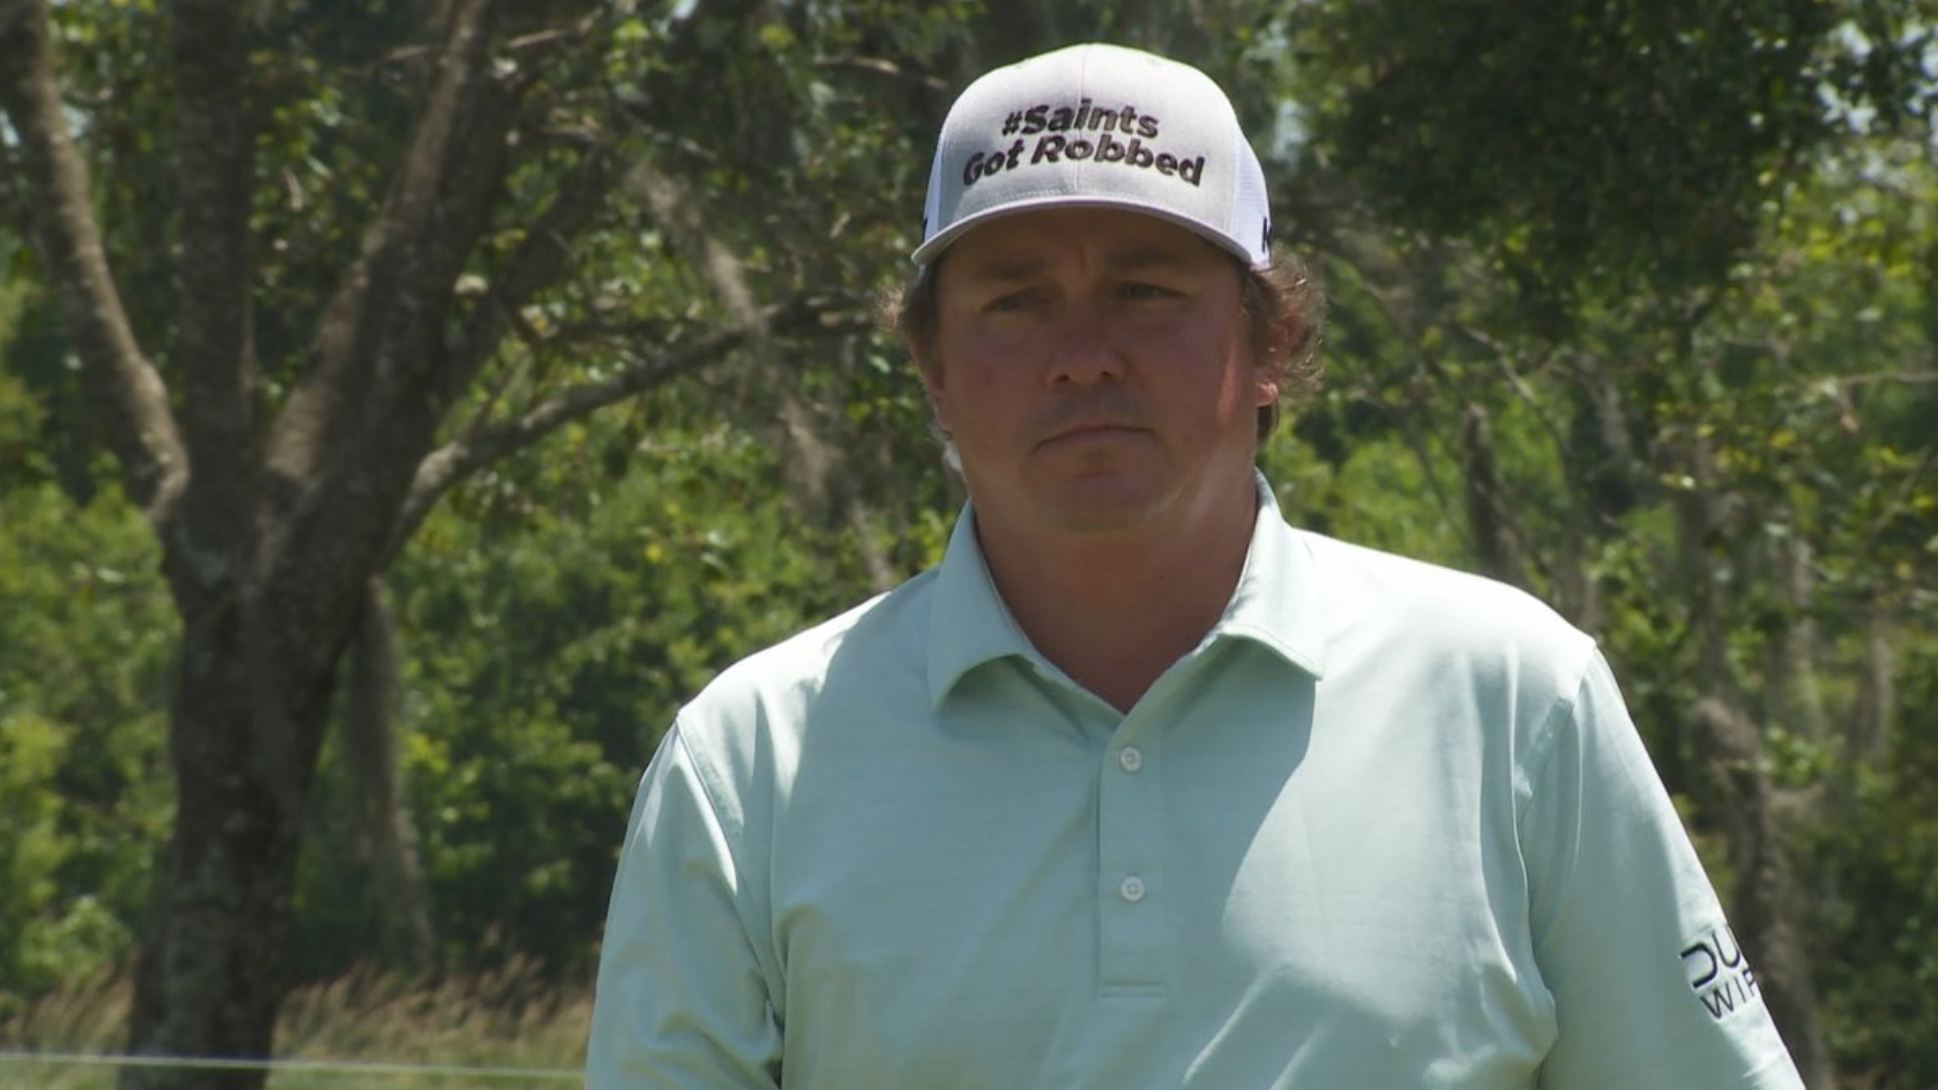 Jason Dufner wears New Saints hat referencing terrible play call playing in New Orleans | is the Loop | Golf Digest